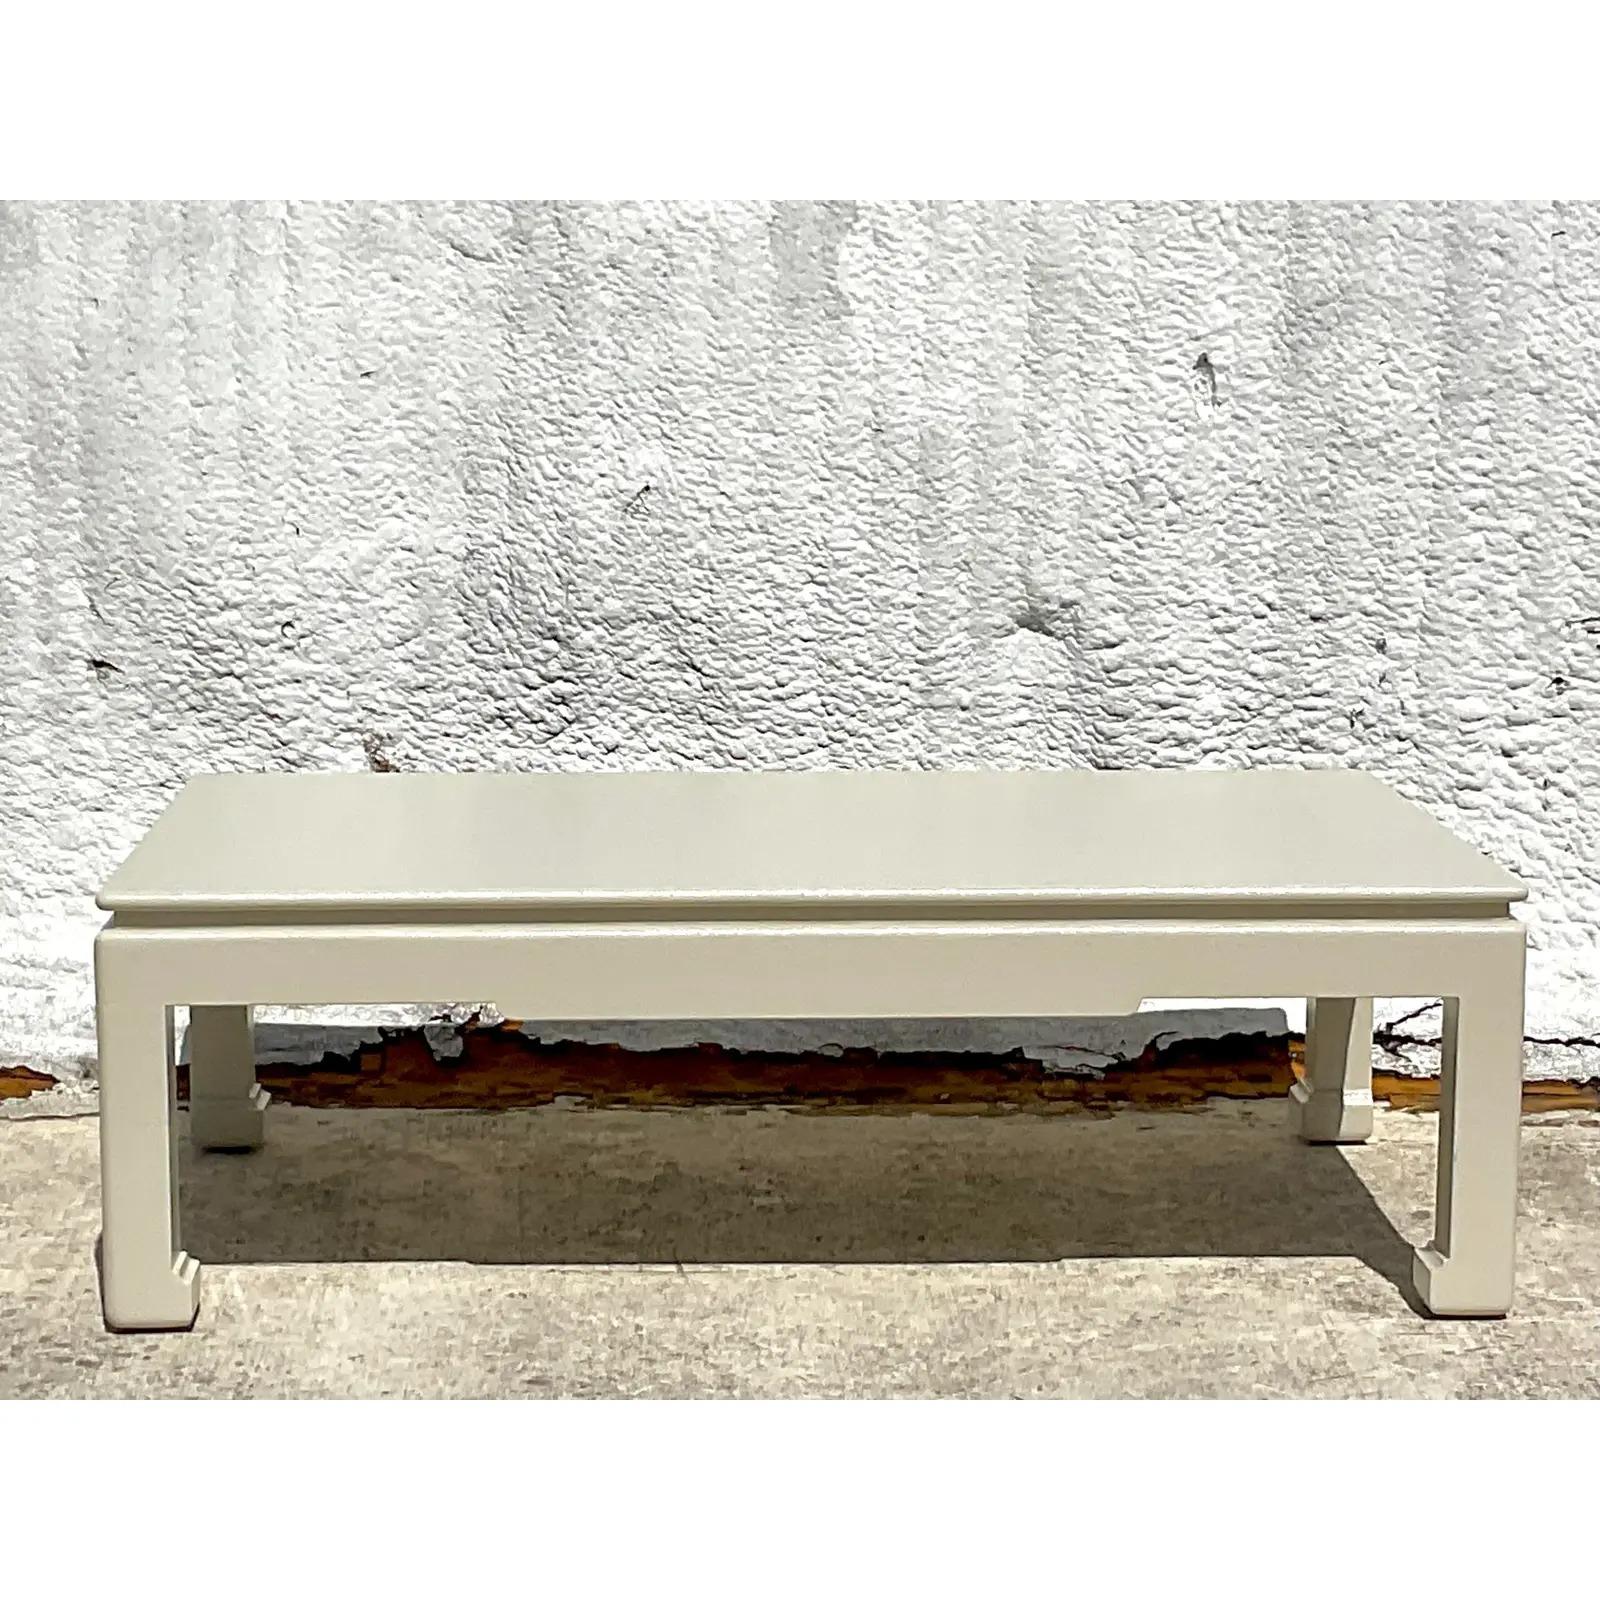 An exceptional vintage Regency Grasscloth coffee table. A large and impressive design done in the manner of Karl Springer. A chic wrapped Grasscloth in a semigloss painted finish. Ming legs and a groves top. Acquired from a Palm Beach estate.